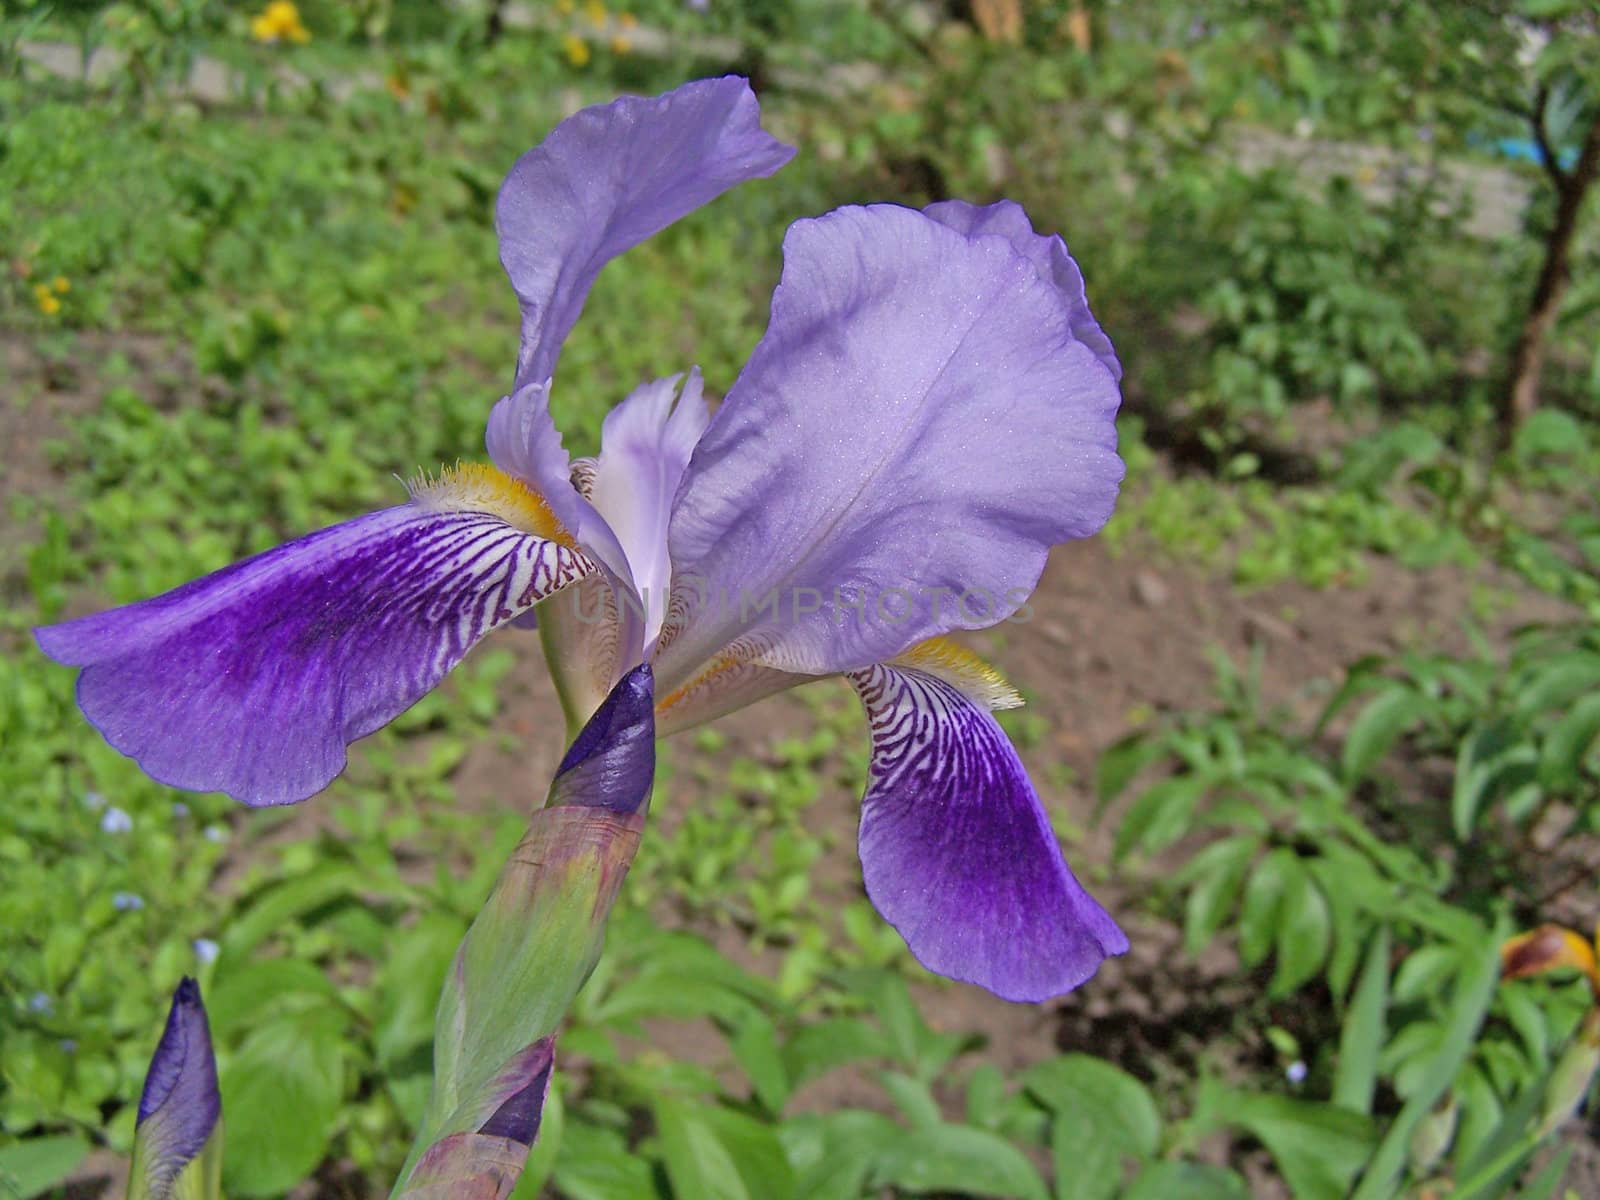 Close up of the lilac and purple colored iris.